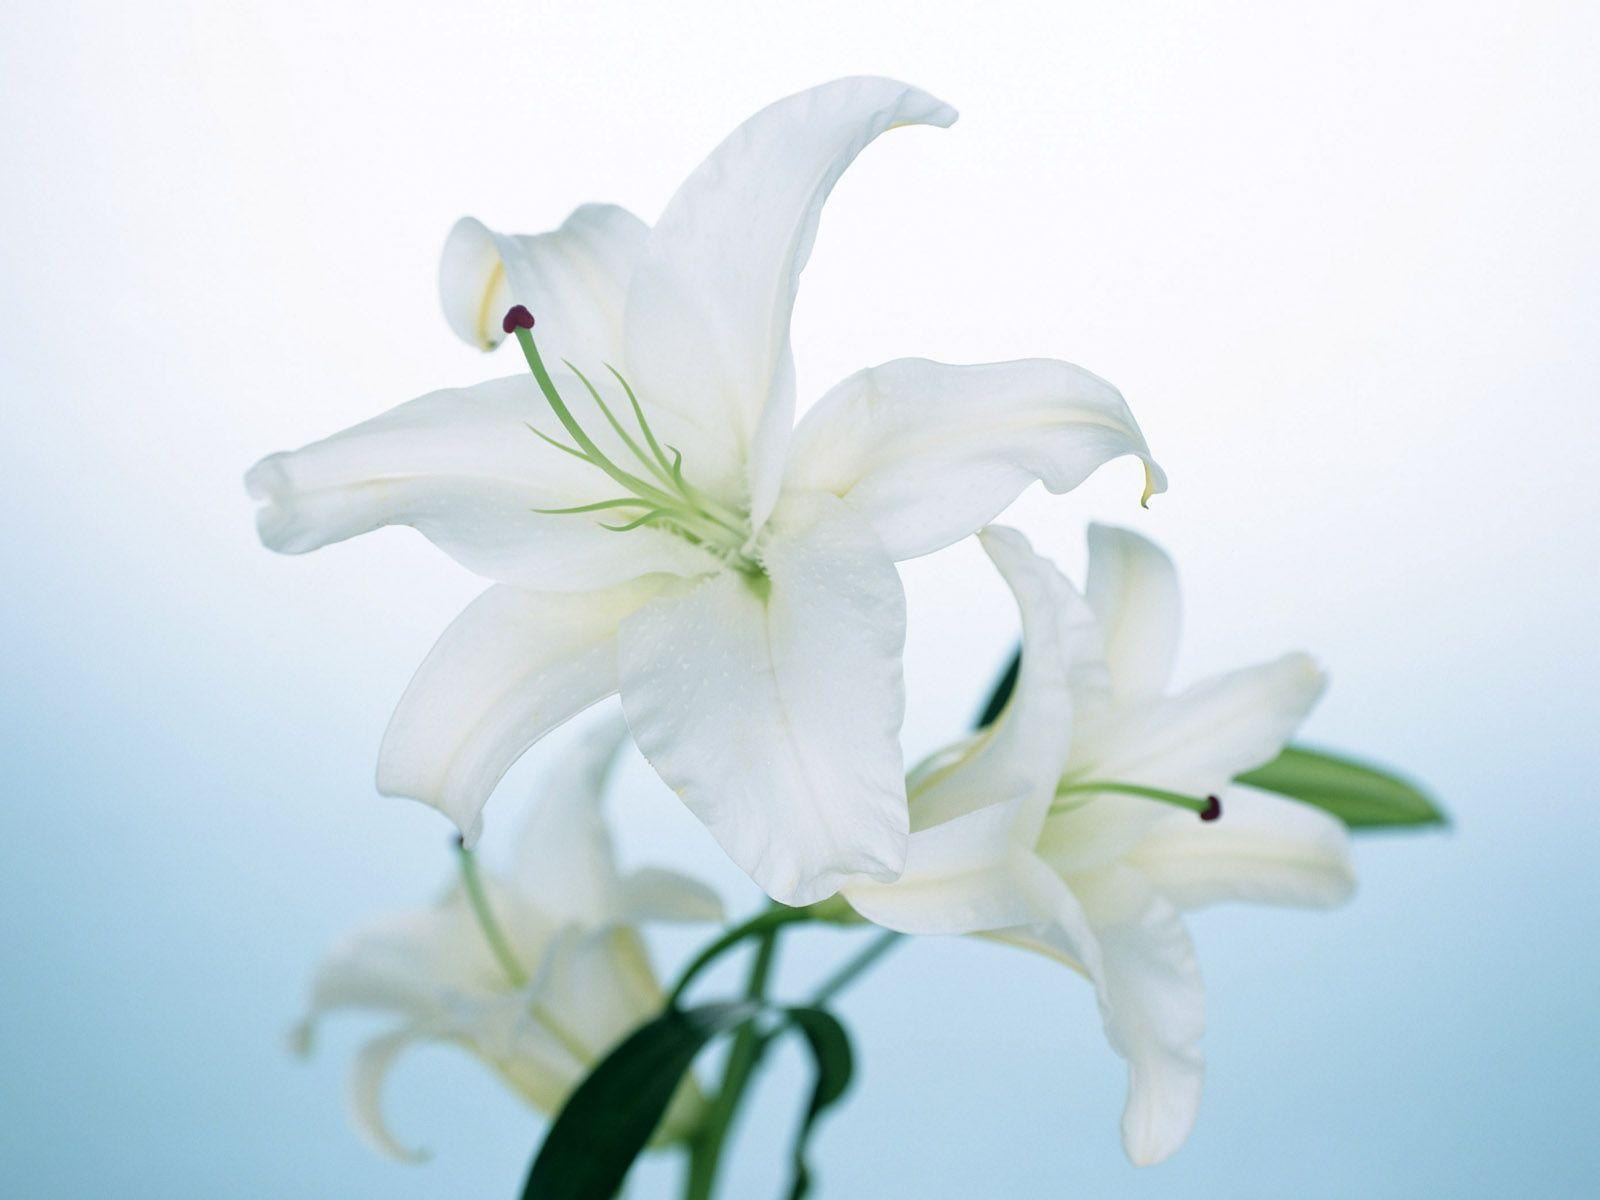 White Lily flowers wallpaper › Findorget.com